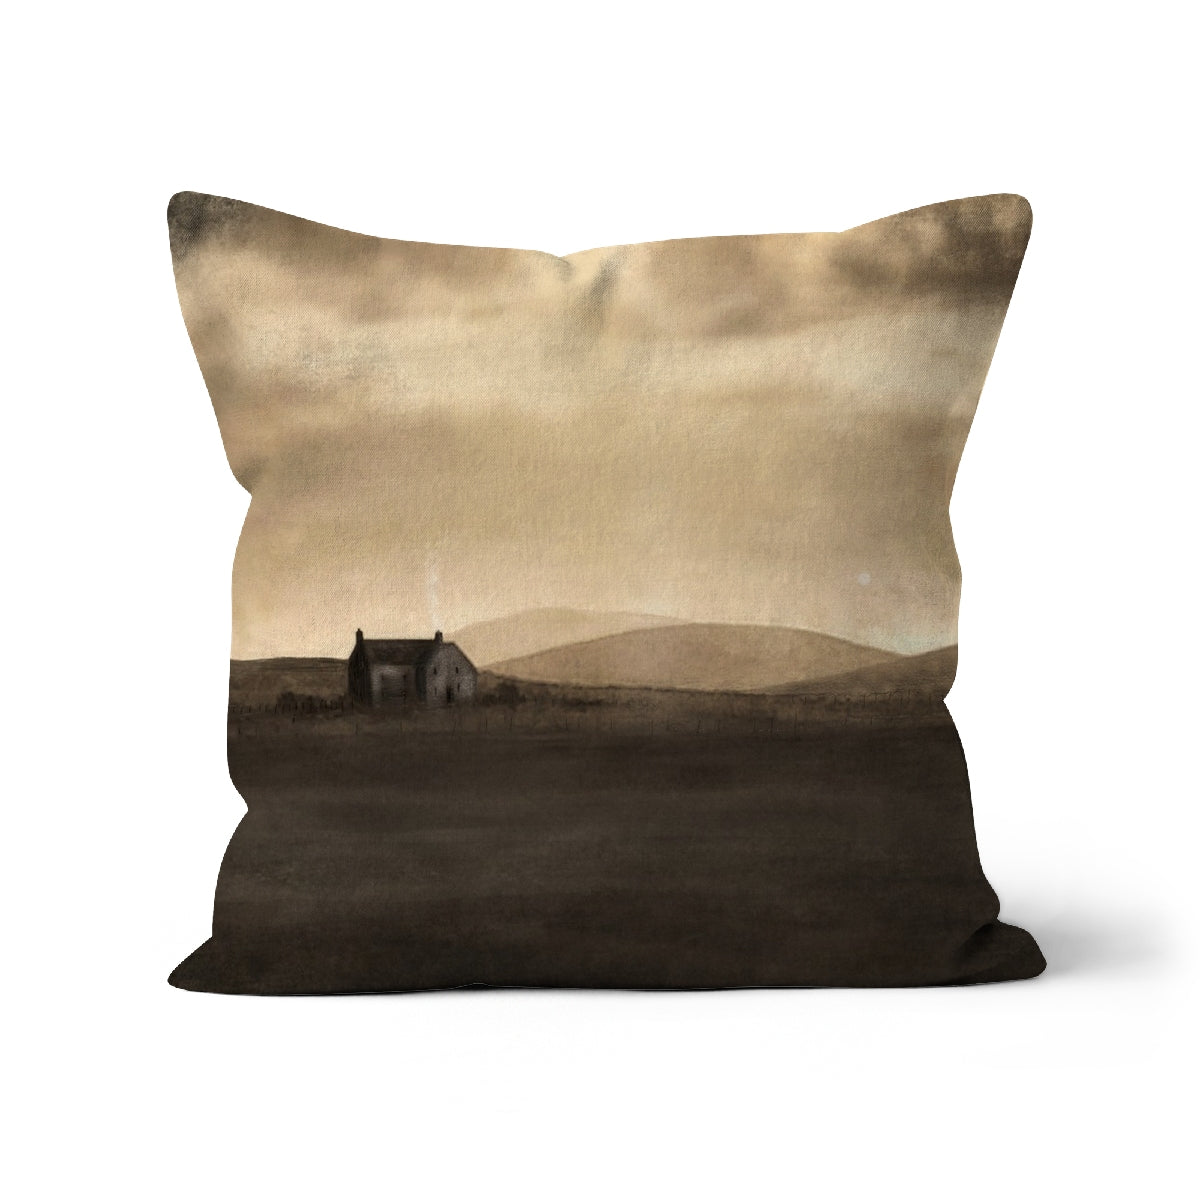 A Moonlit Croft Art Gifts Cushion-Cushions-Hebridean Islands Art Gallery-Canvas-12"x12"-Paintings, Prints, Homeware, Art Gifts From Scotland By Scottish Artist Kevin Hunter